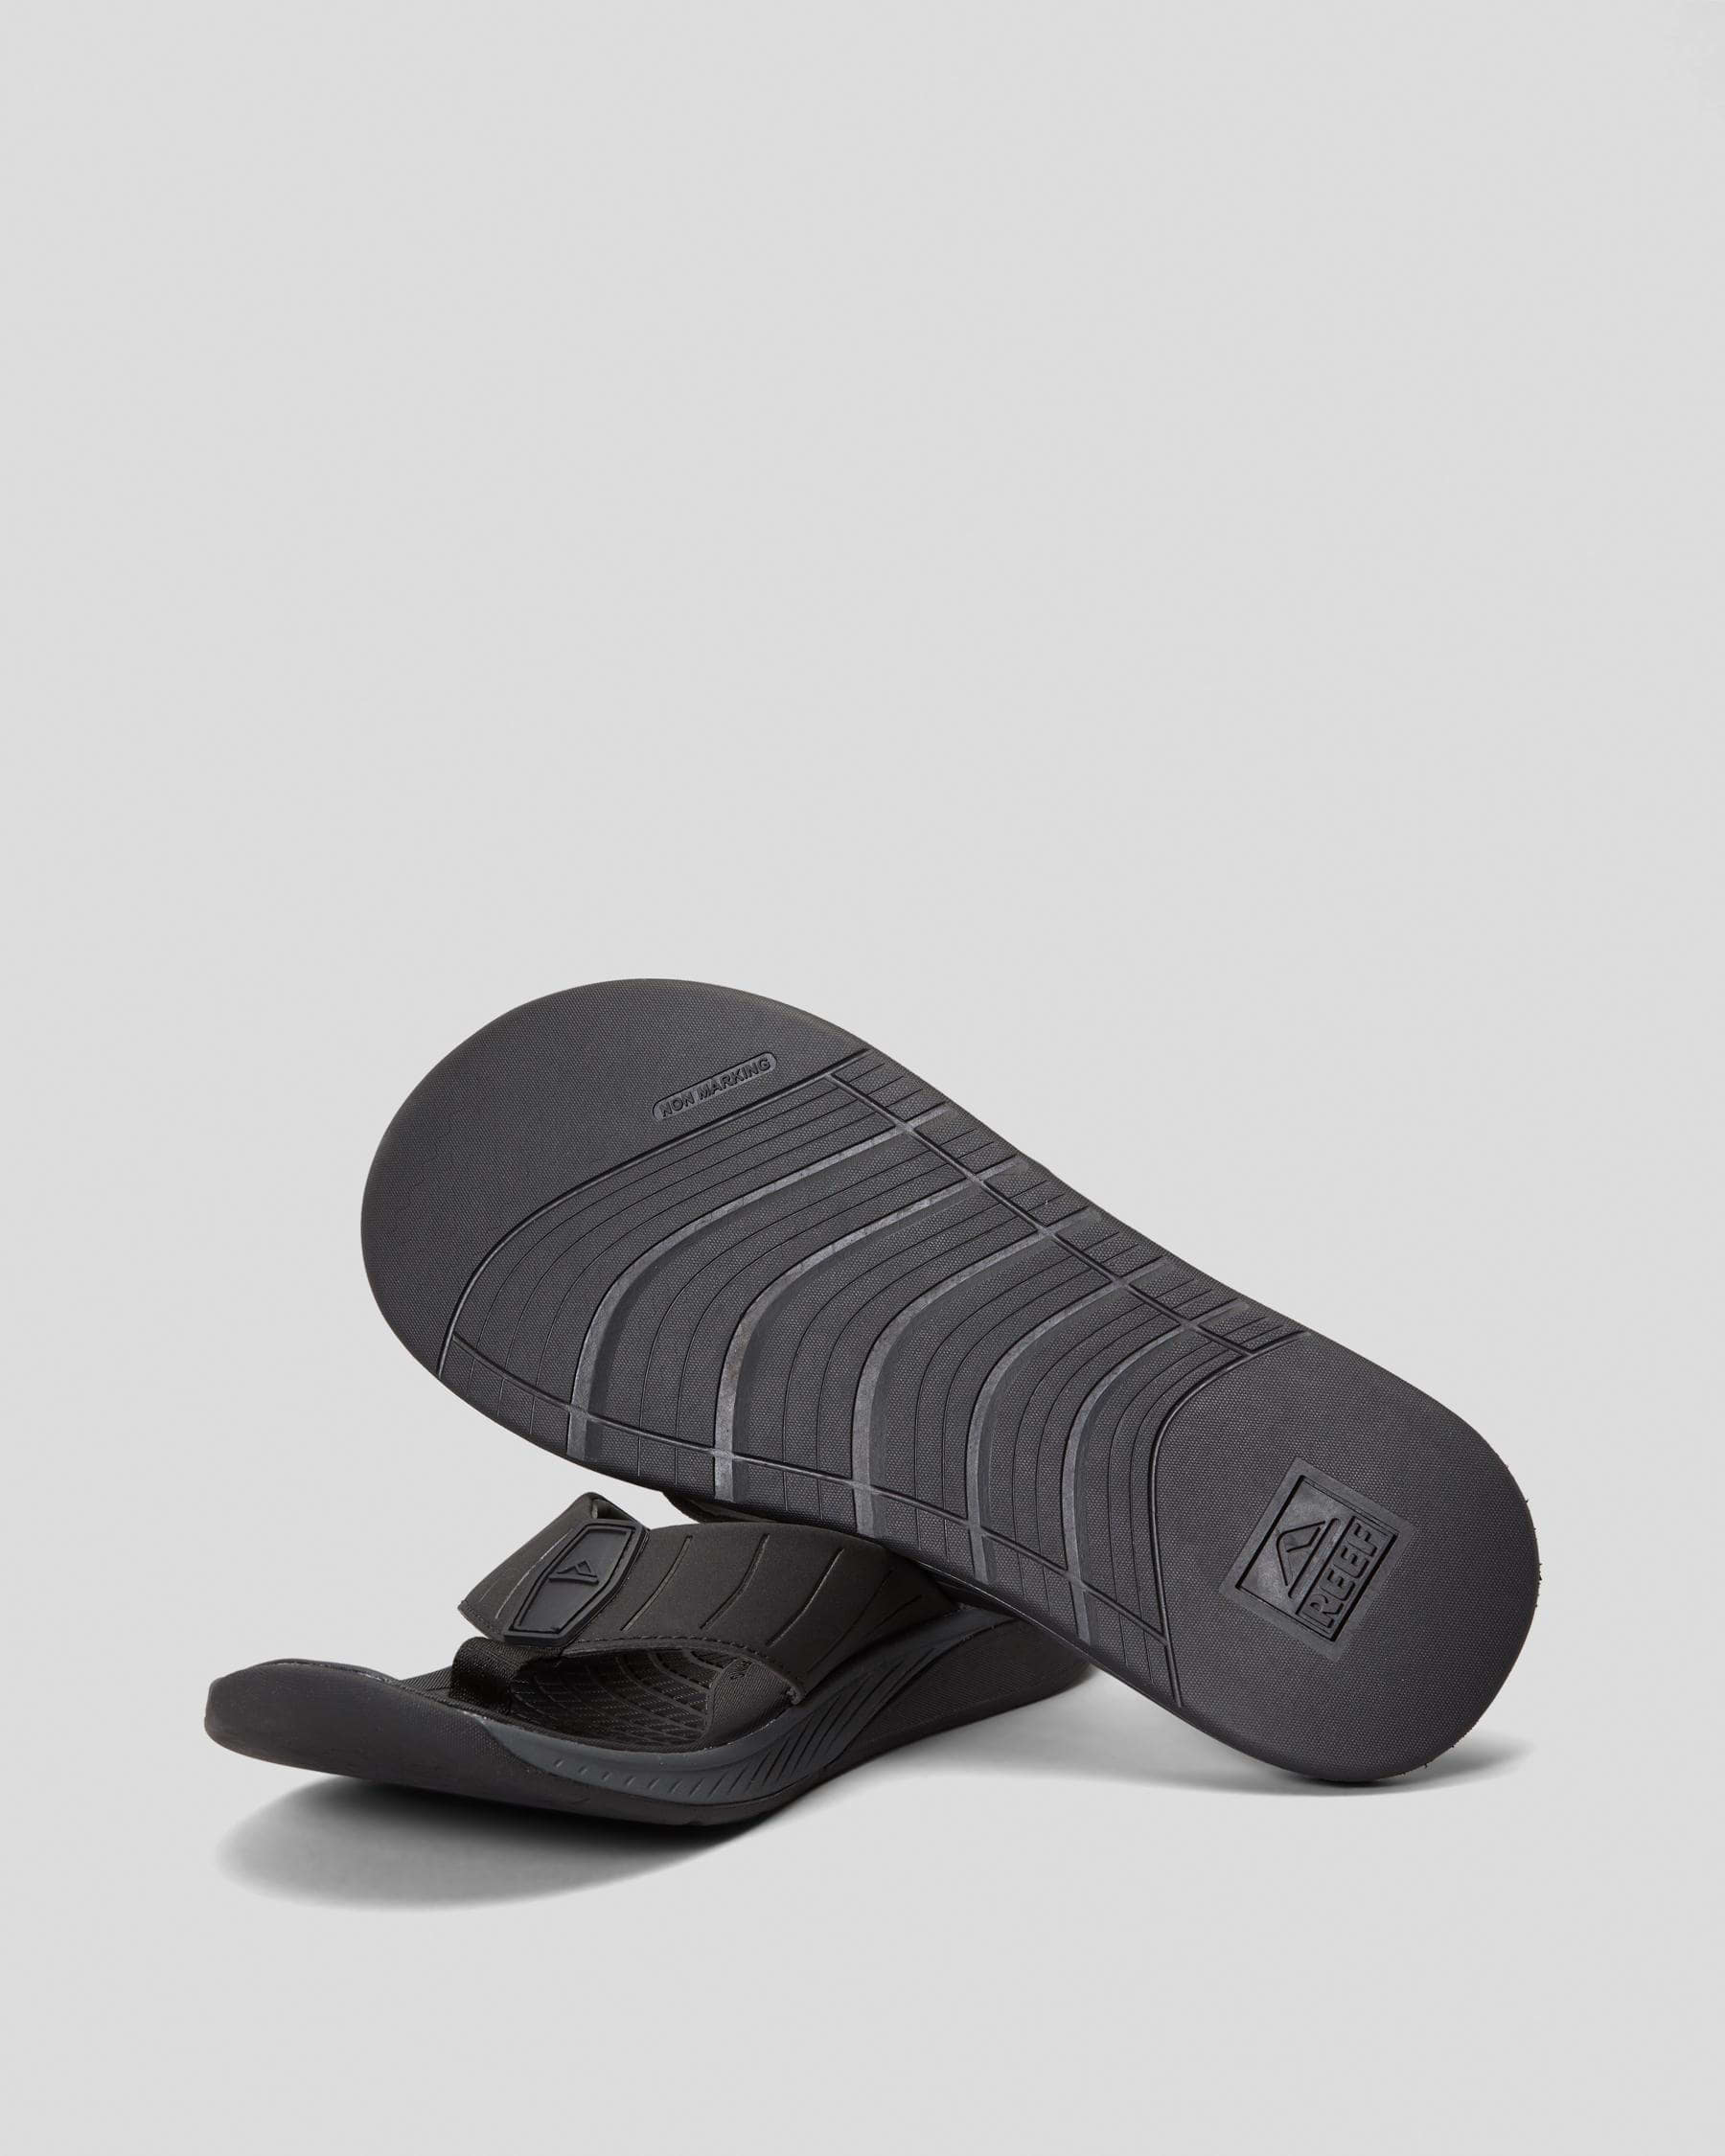 Reef Deckhand Sandals In Stormy Black - Fast Shipping & Easy Returns ...